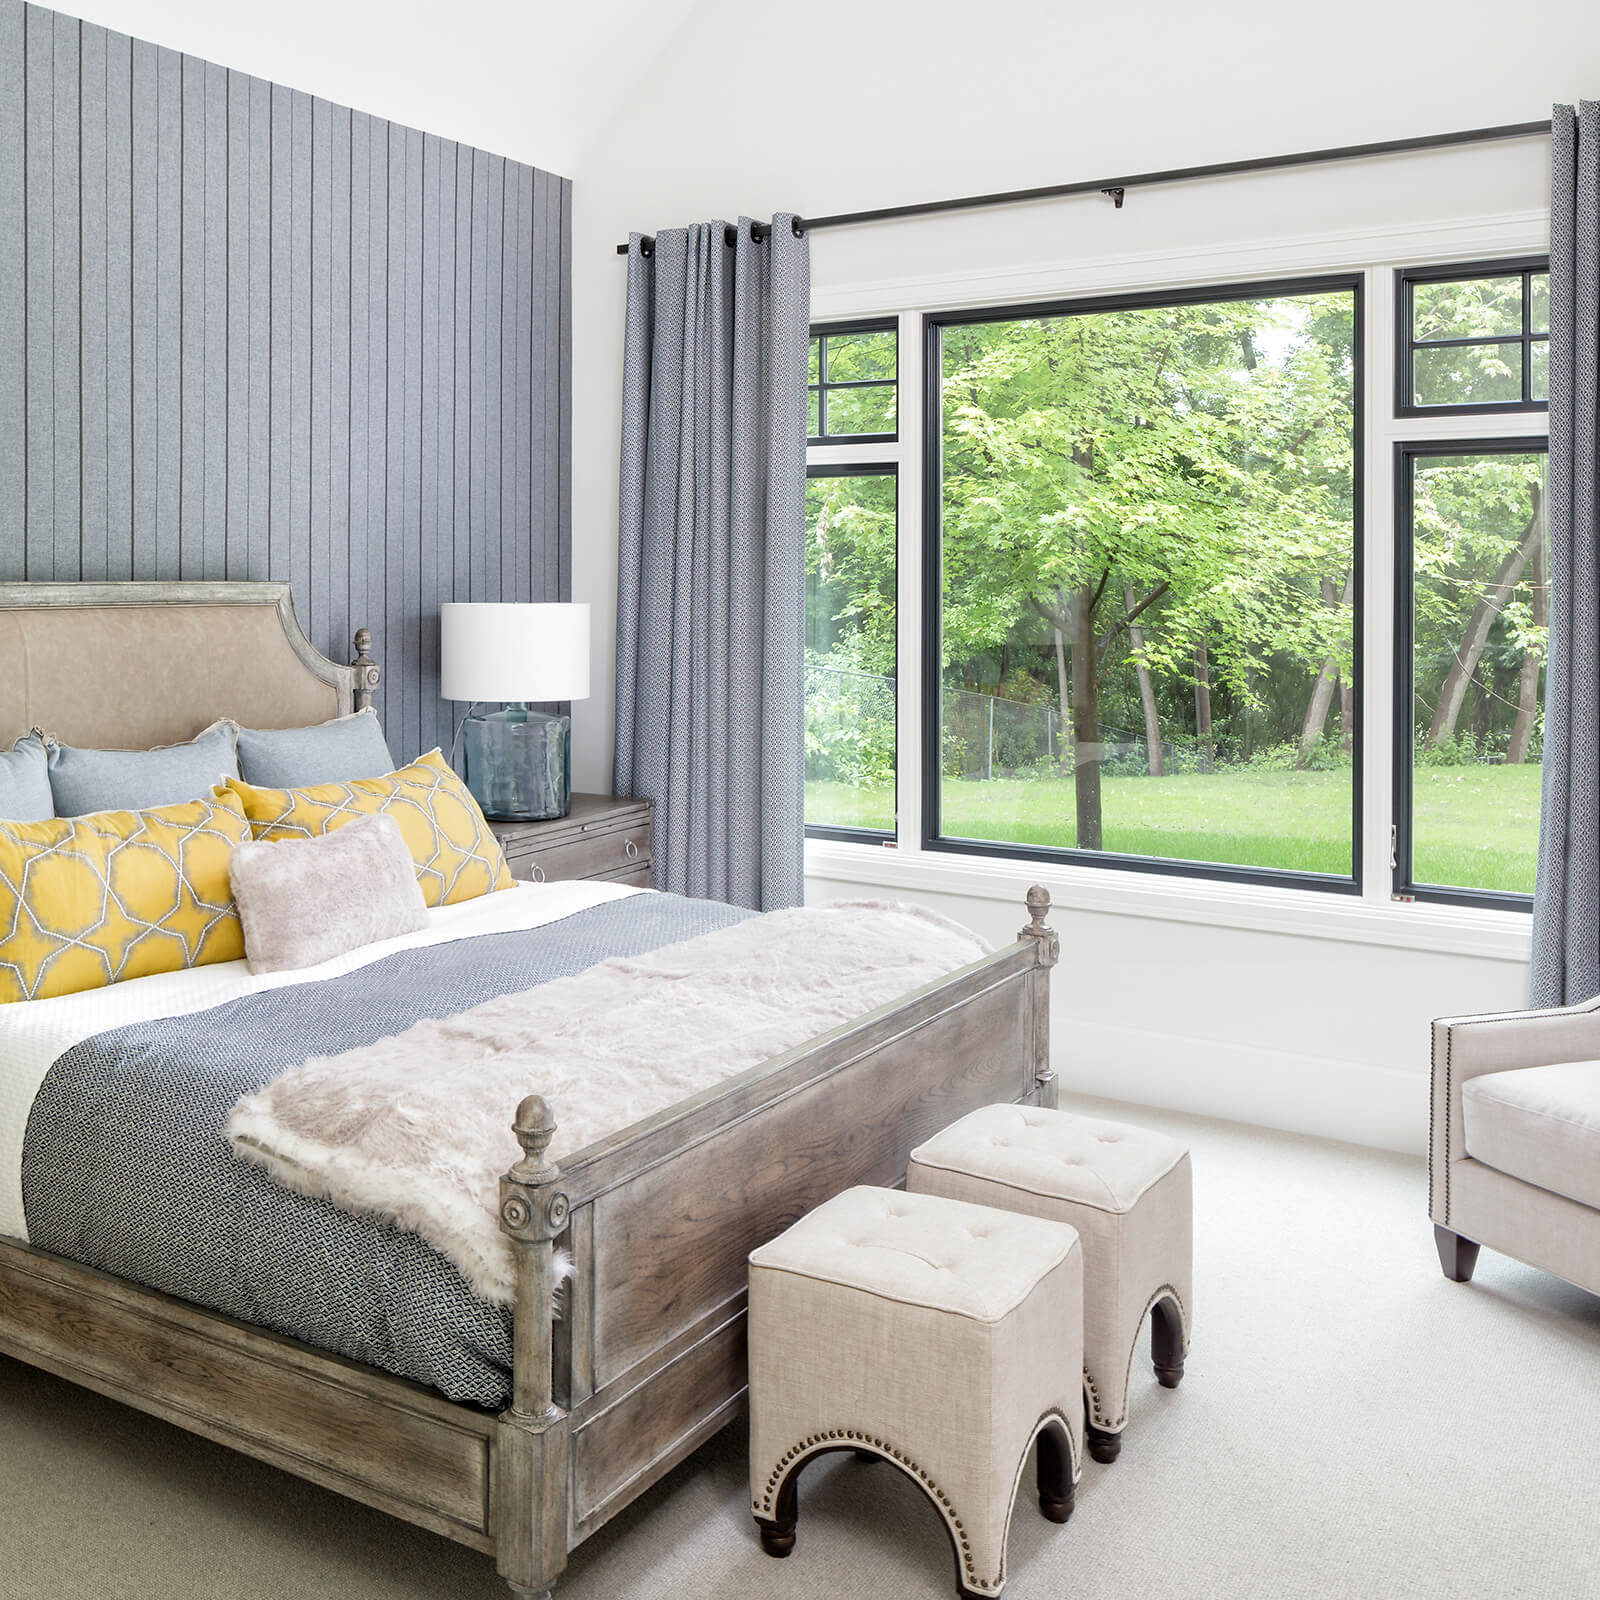 Bedroom with Marvin Signature Ultimate Casement Windows